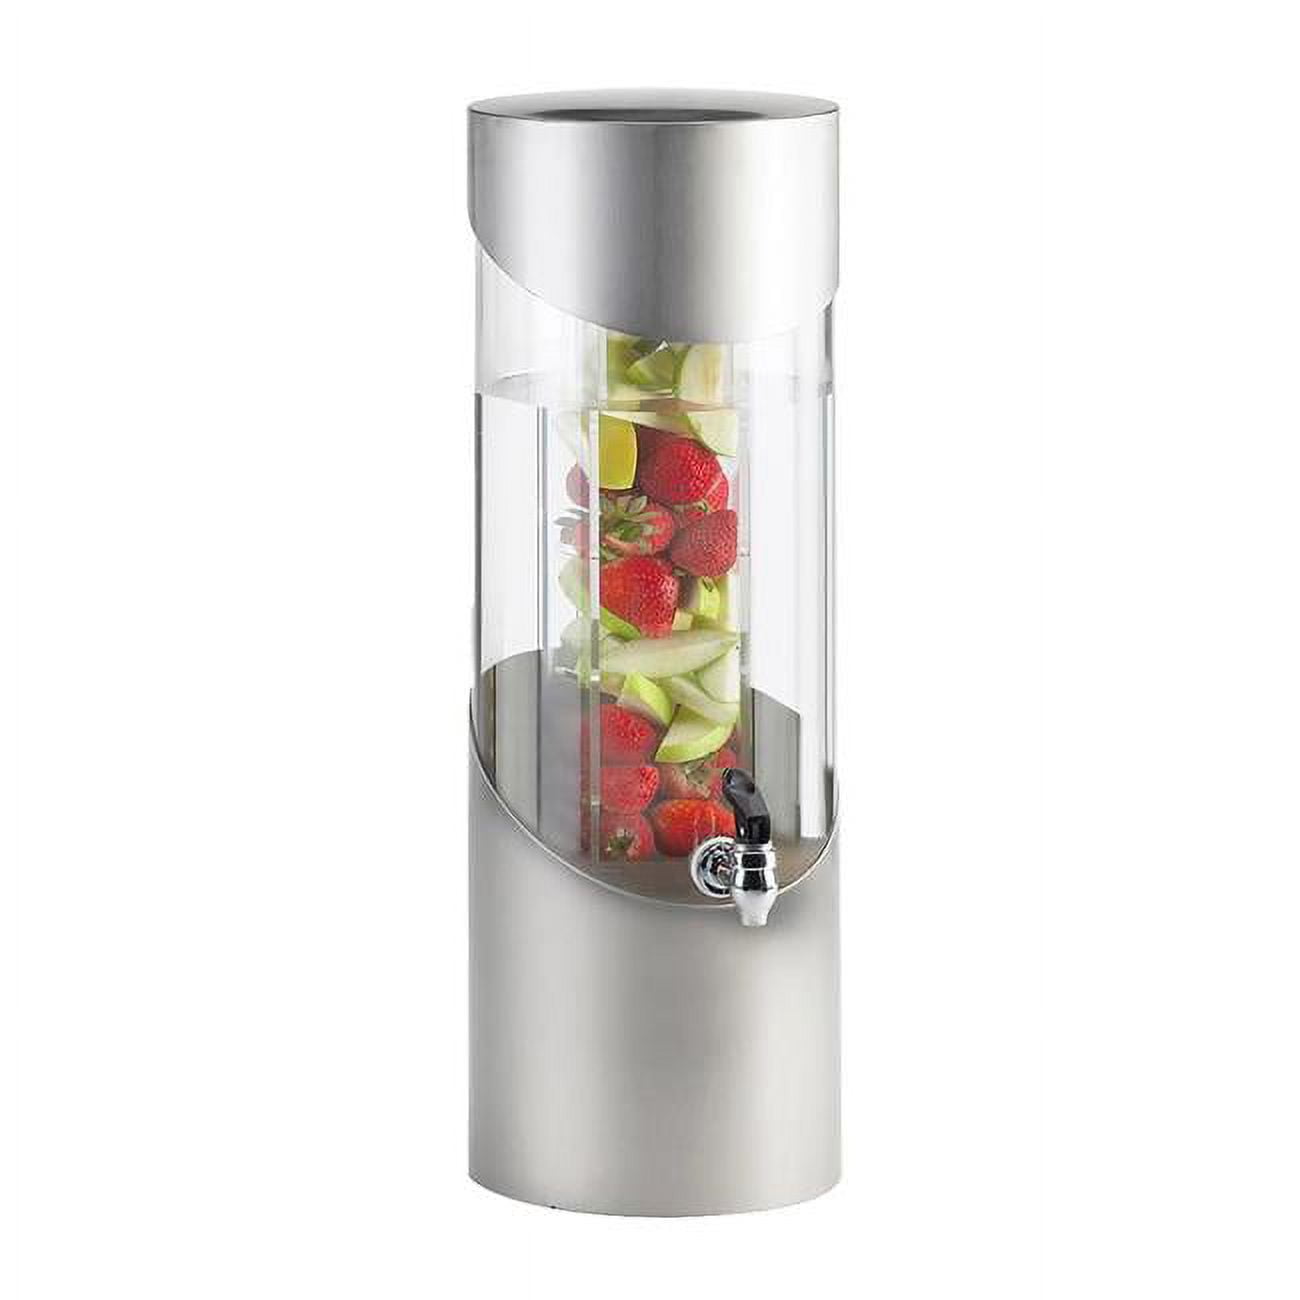 1990-3inf-55 3 Gal Stainless Steel Beverage Dispenser With Infusion Chamber, Round - 8.125 X 10.5 X 23.5 In.